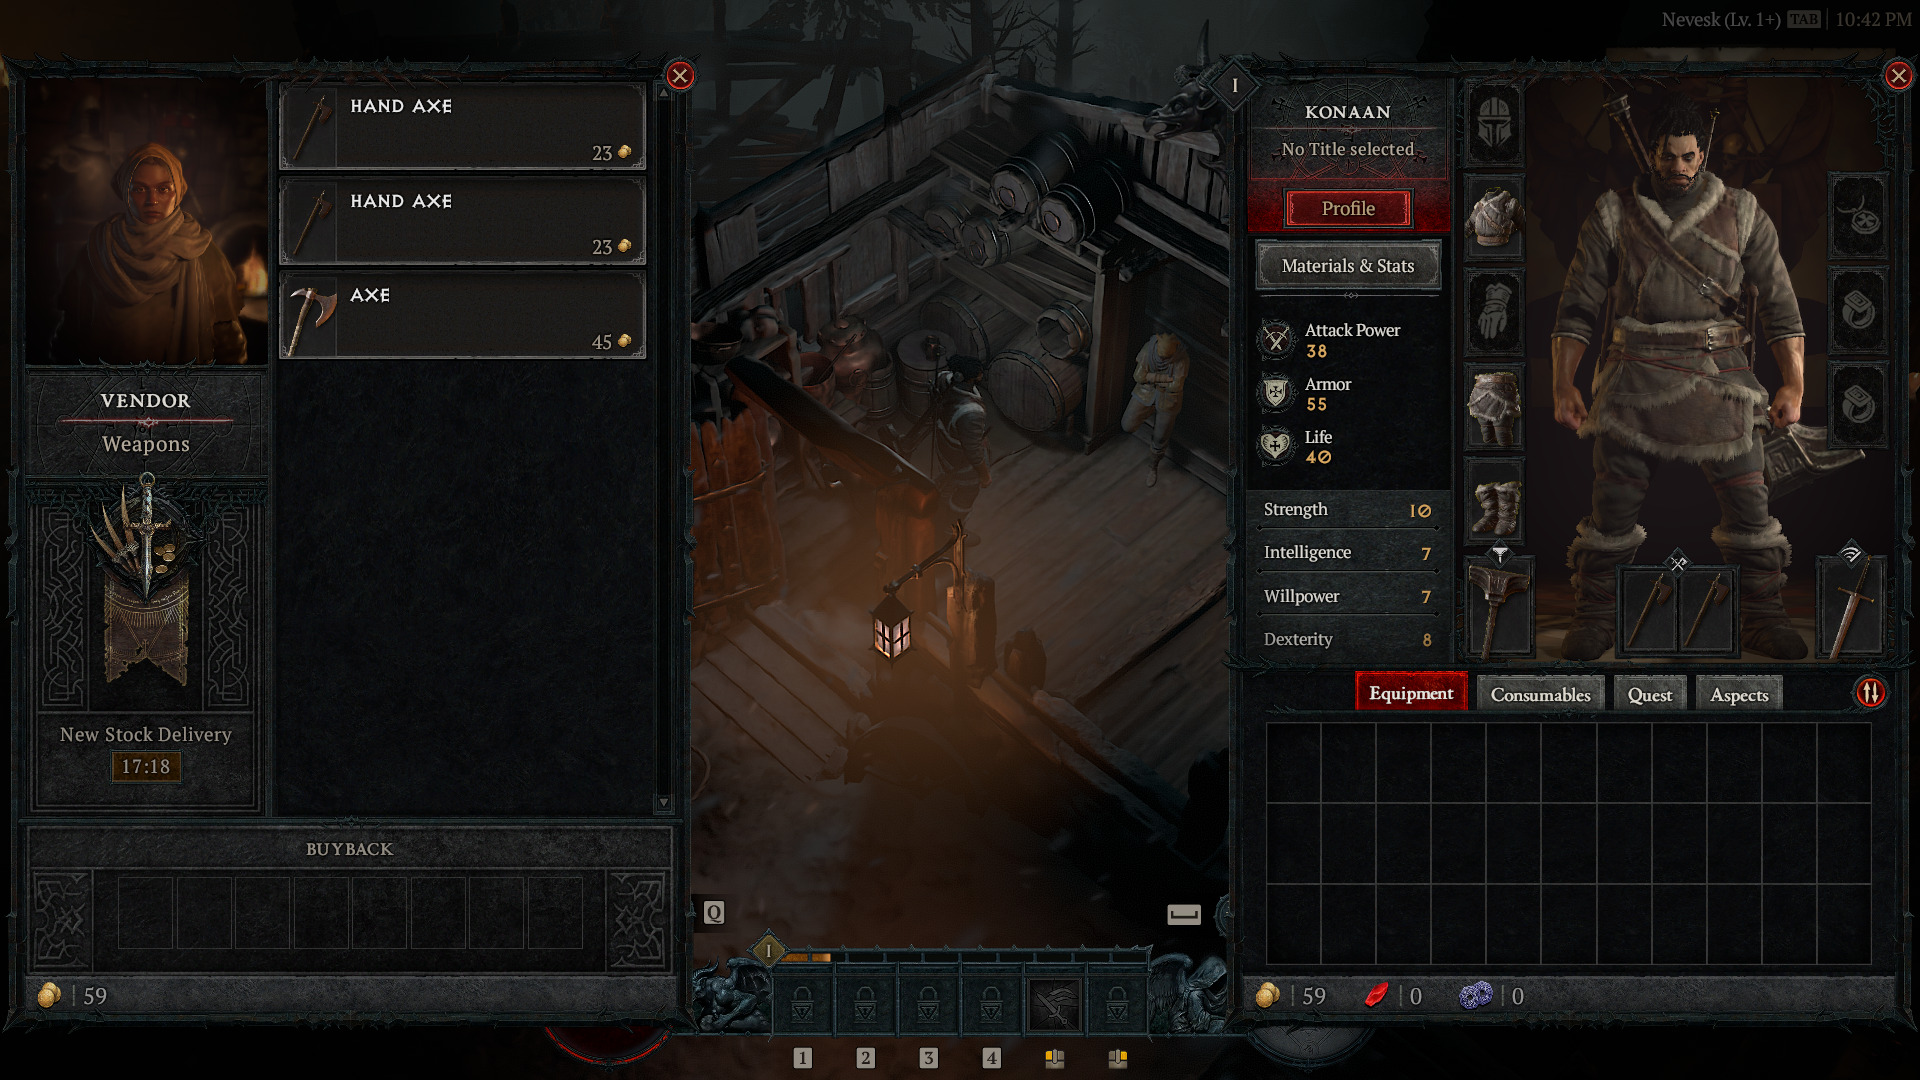 A screenshot of the player's inventory in Diablo IV